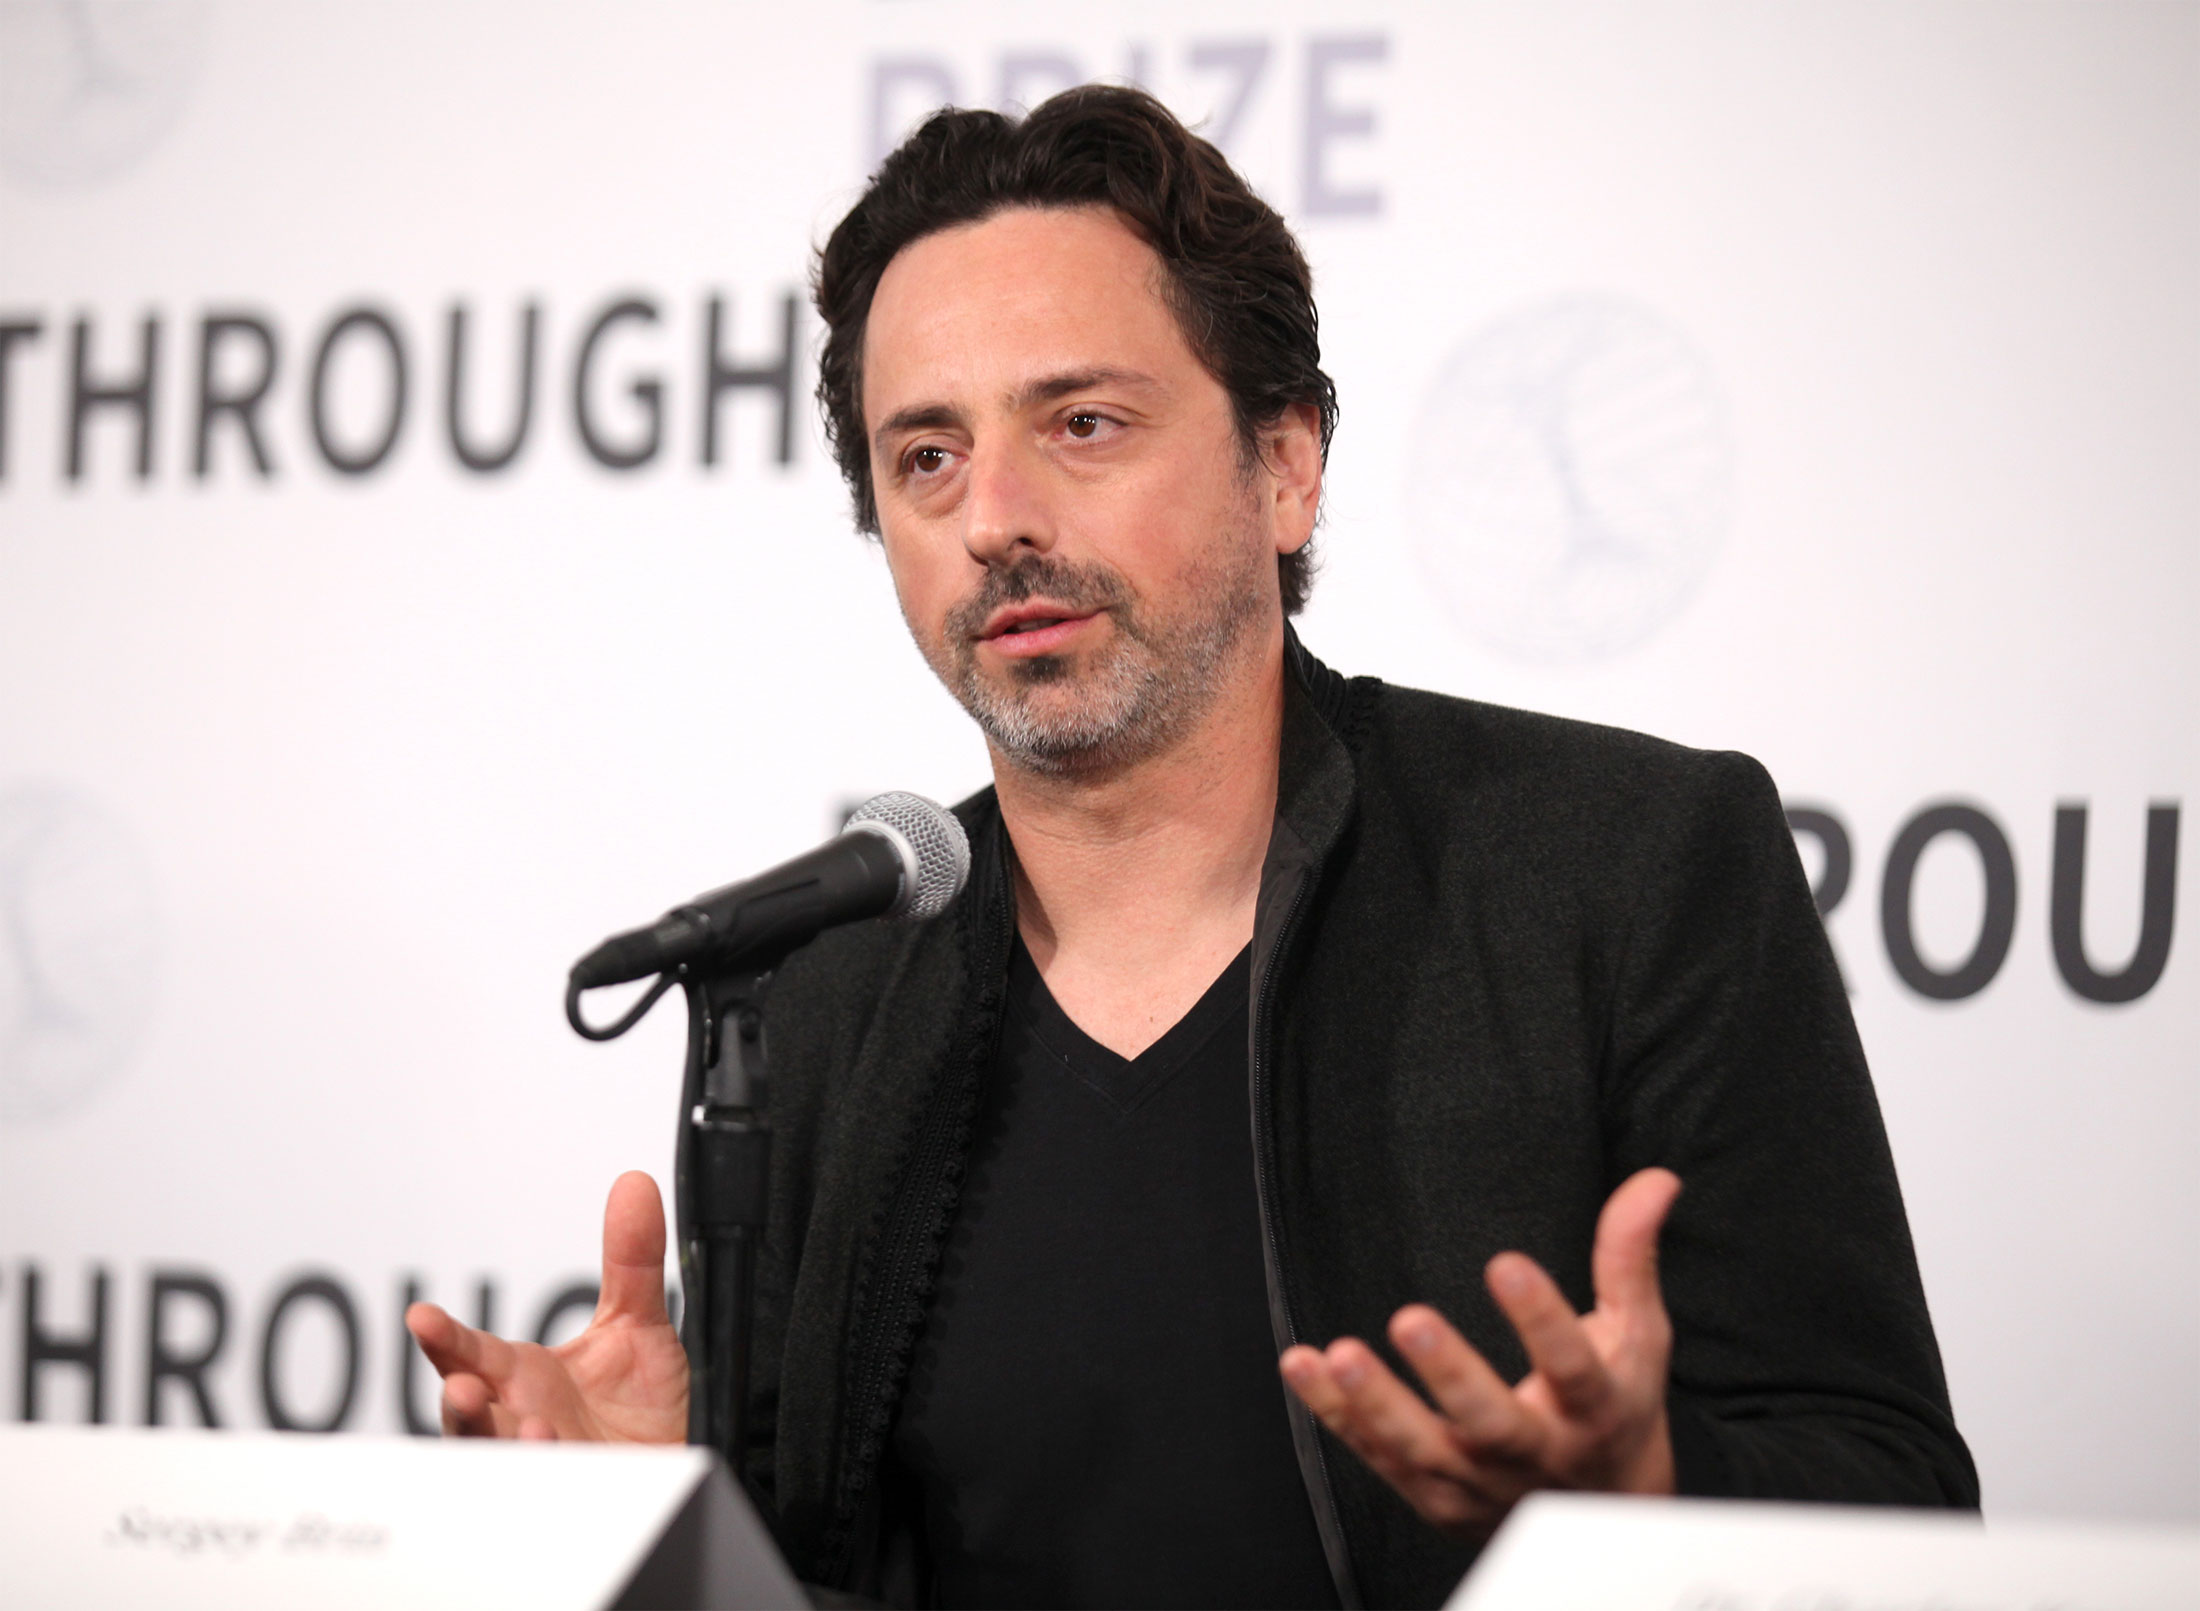 Sergey Brin (Photo by Kelly Sullivan/Getty Images for Breakthrough Prize)